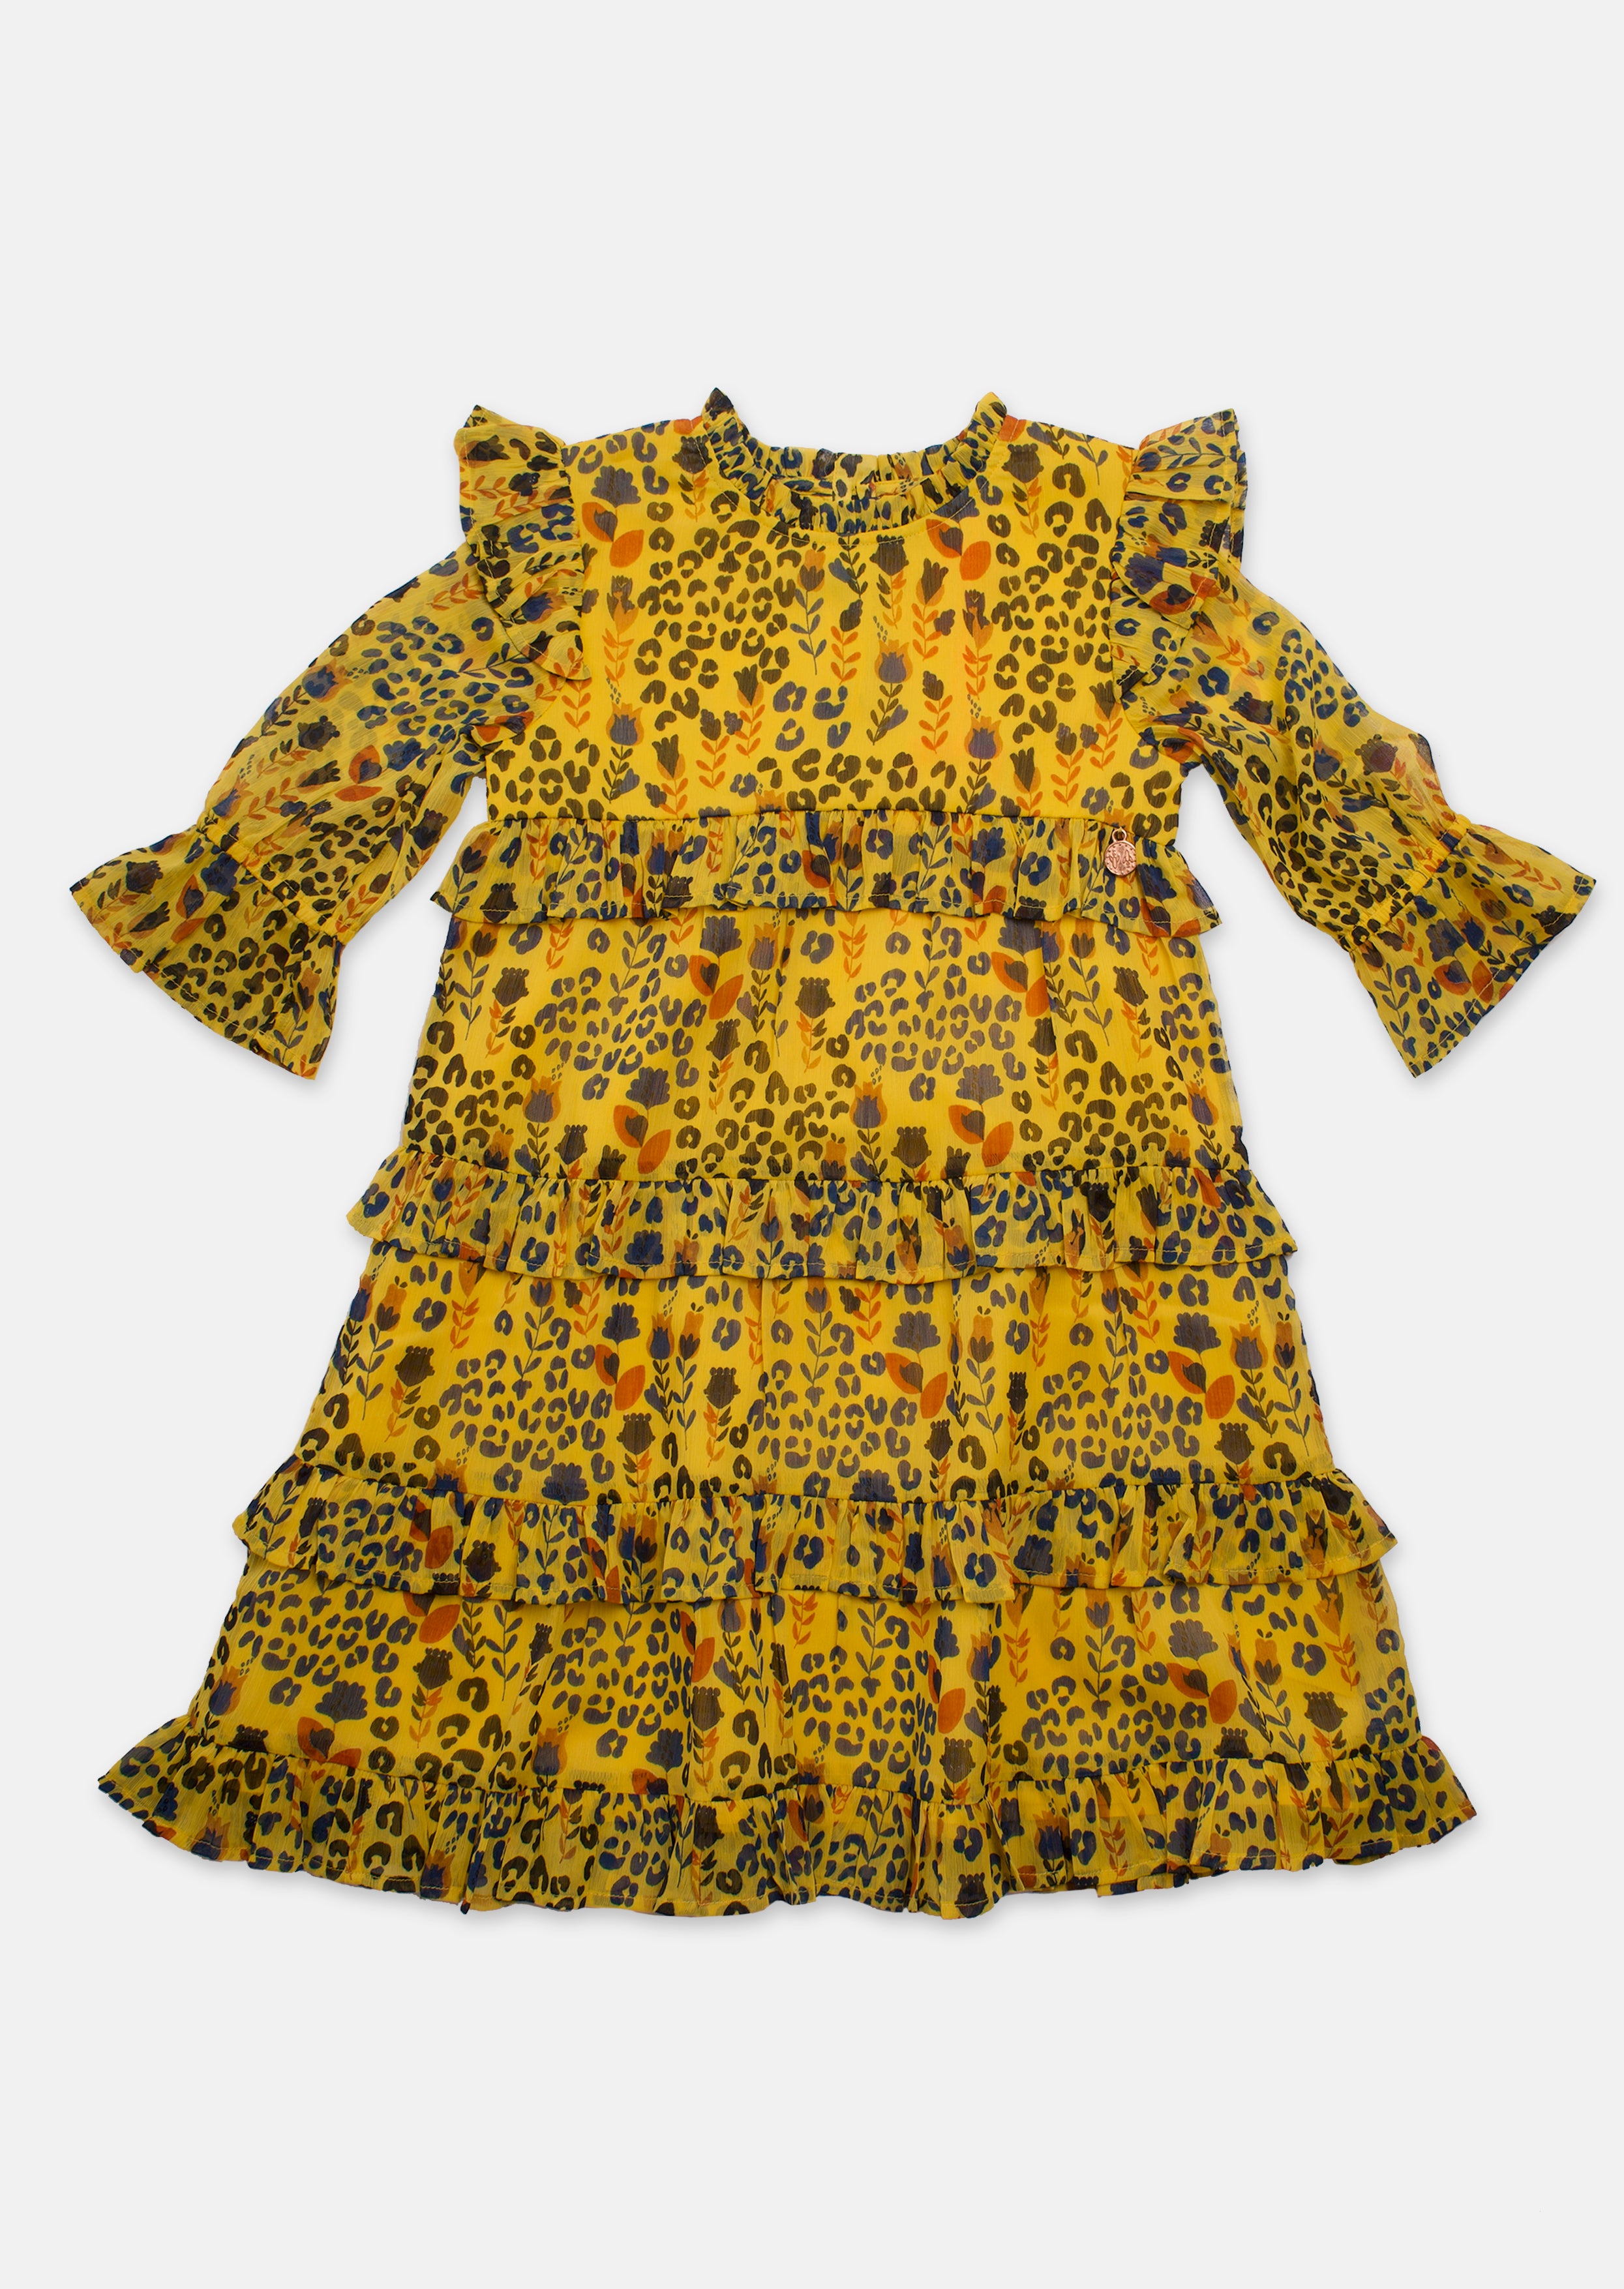 Girls Floral Printed Woven Yellow Dress